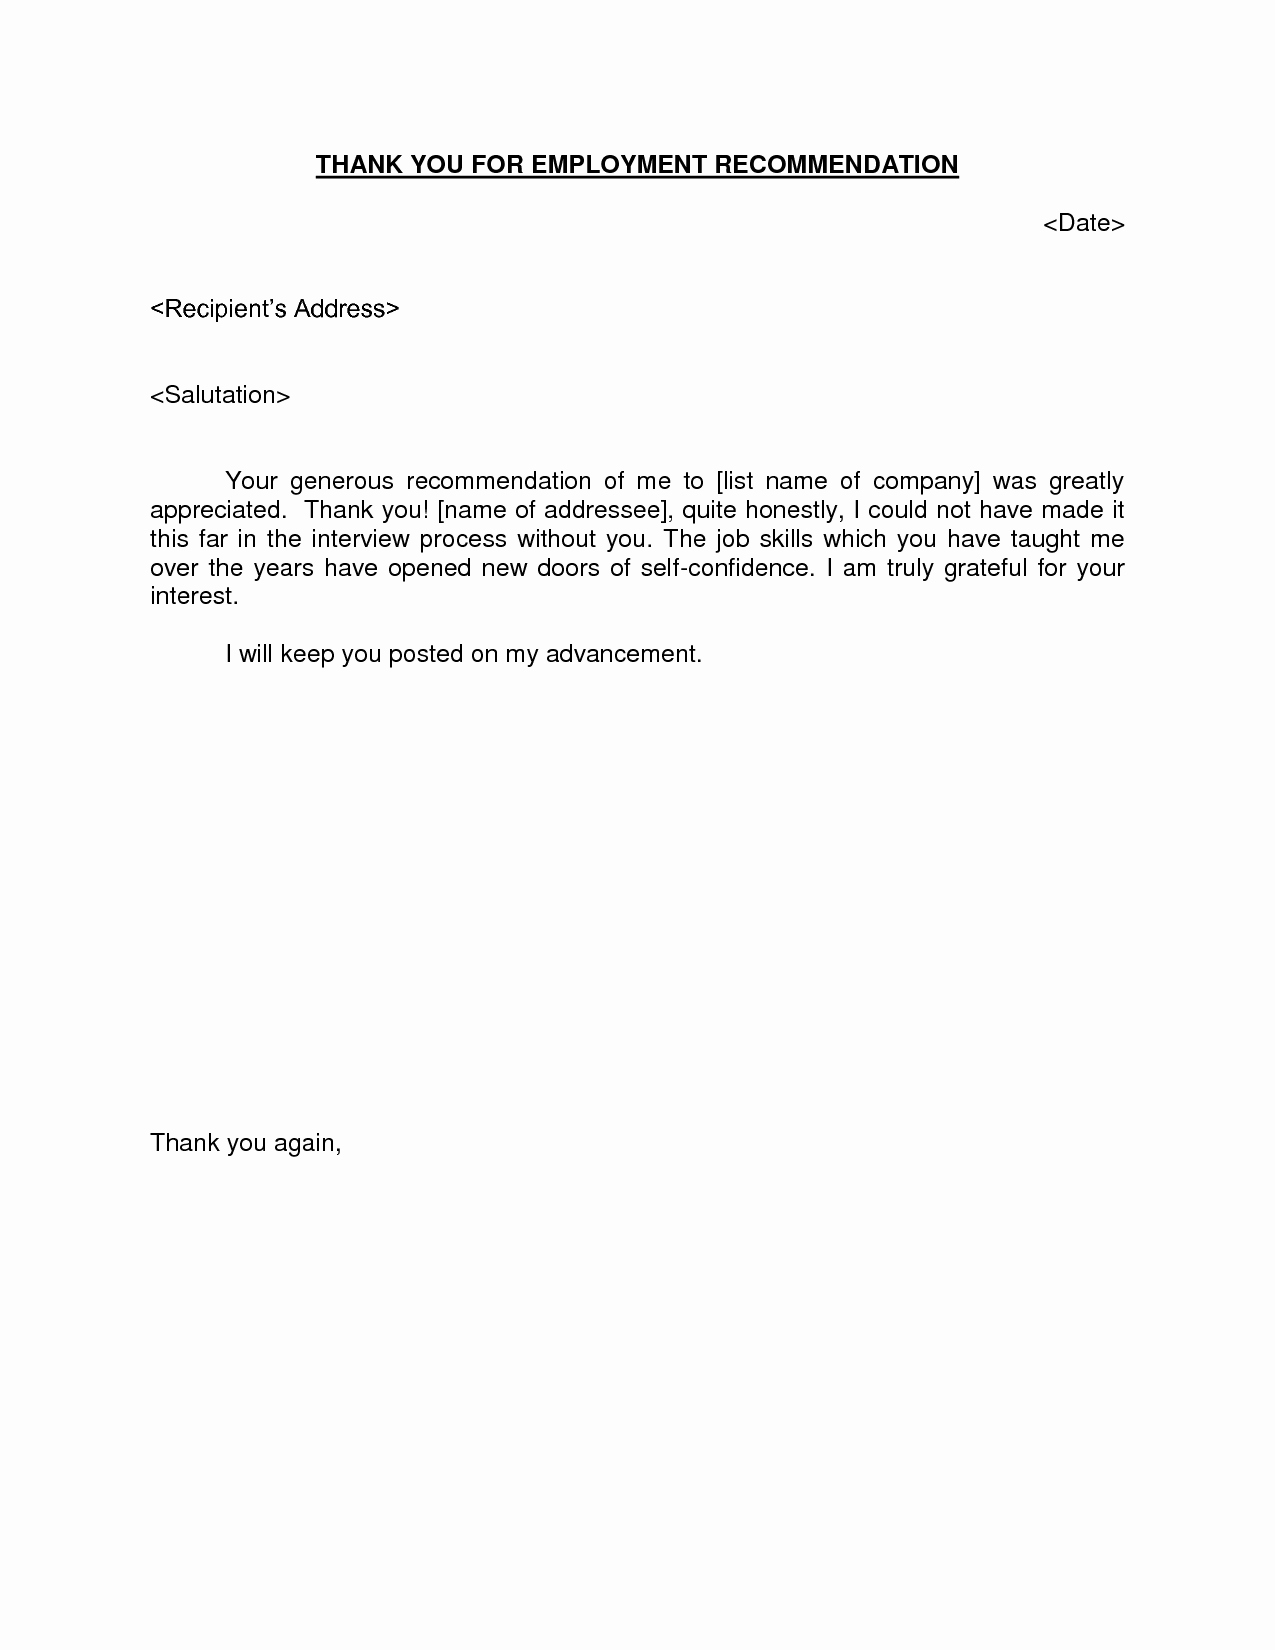 Thank You Letter Recommendation Unique Write My Paper Crna Student Resume thesis Web